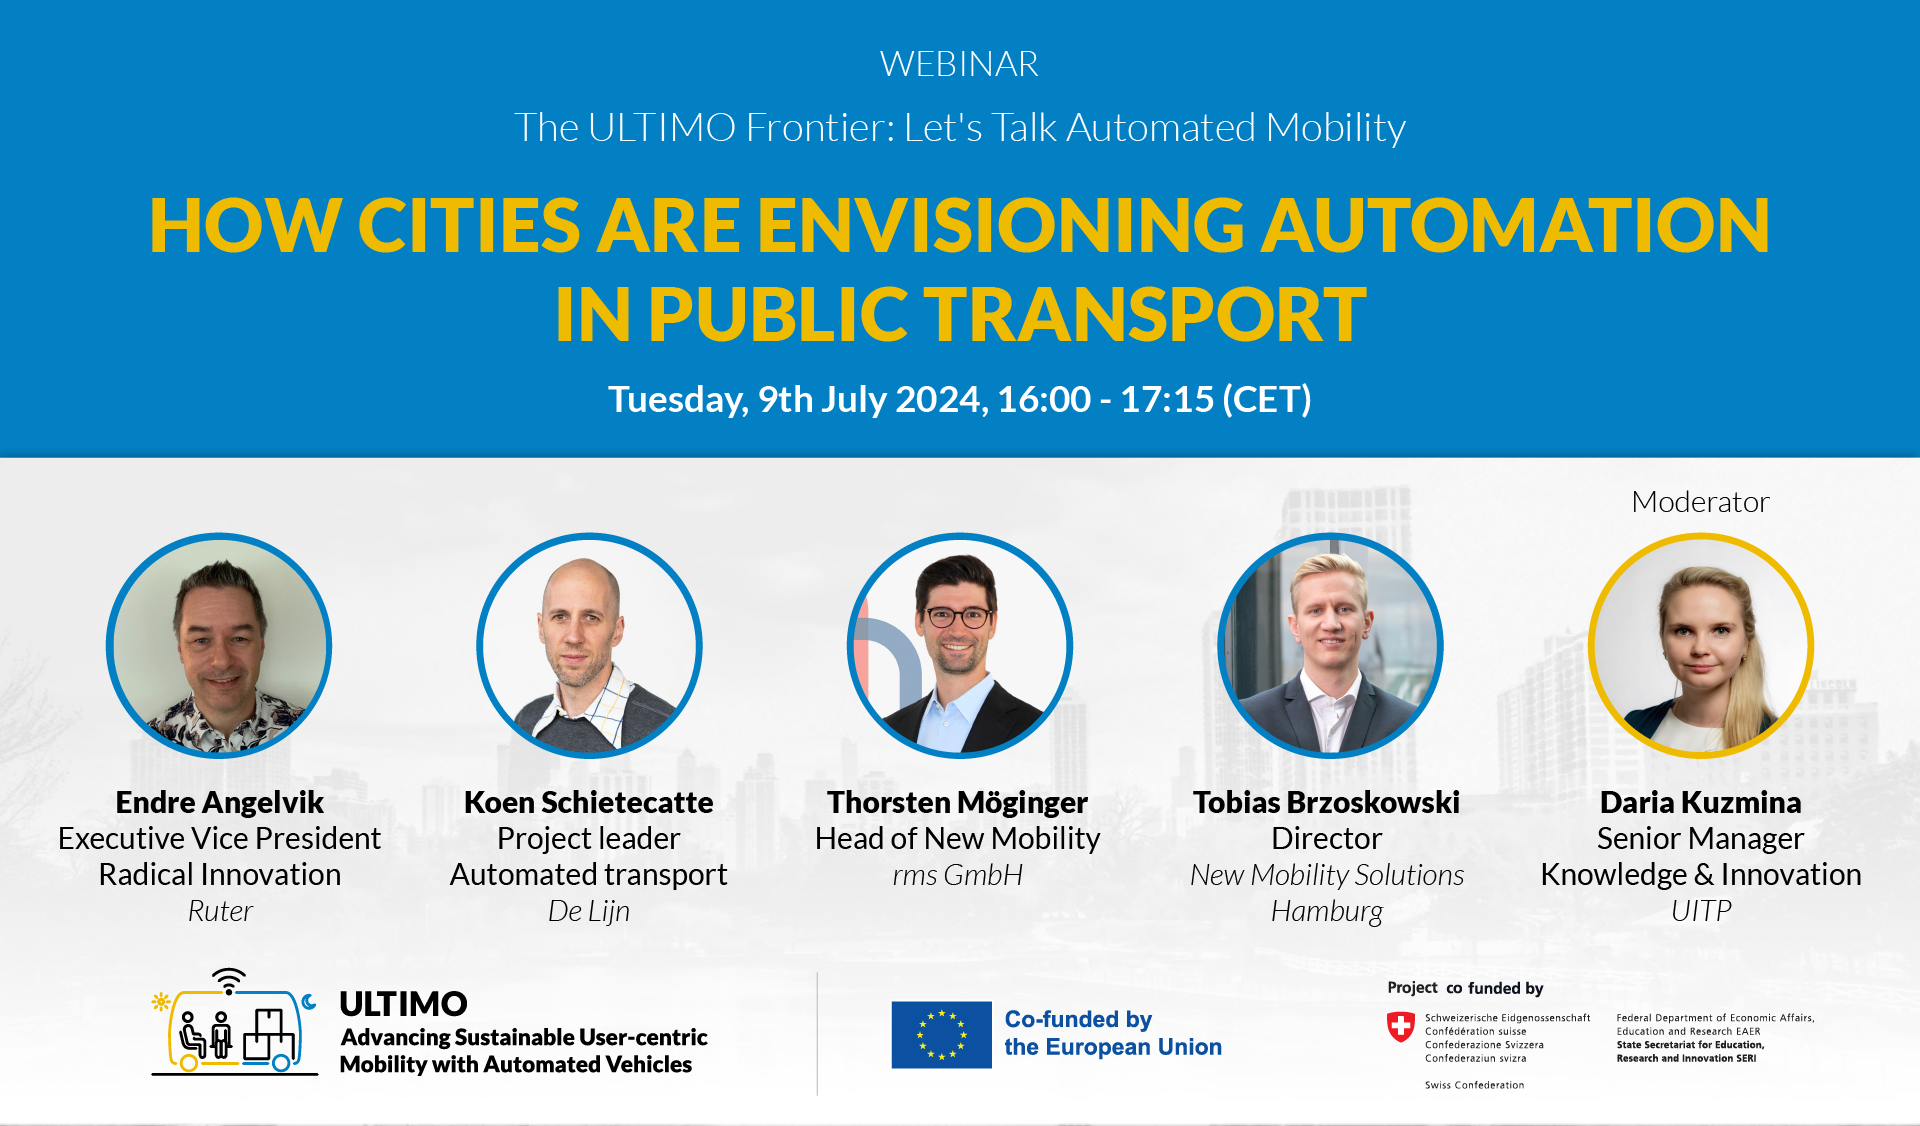 ULTIMO webinar: “How Cities are Envisioning Automation in Public Transport”